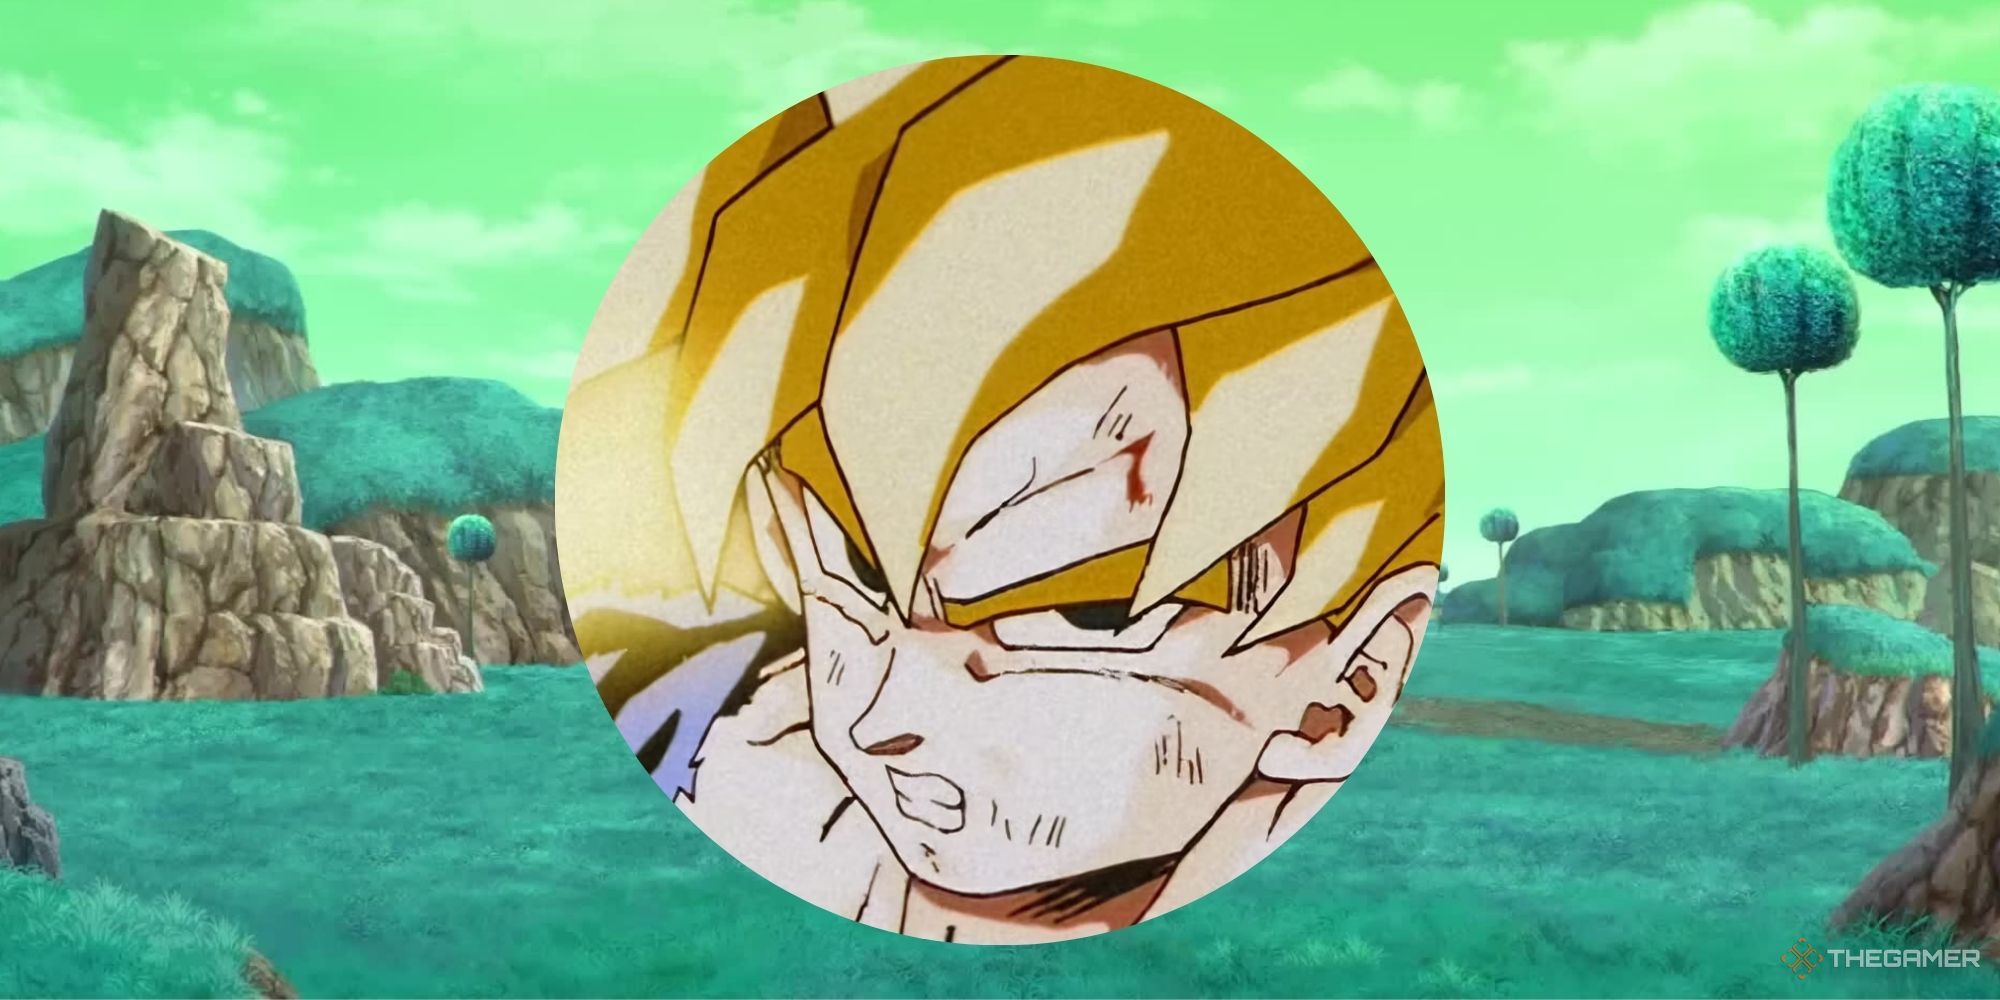 Dragon Ball Z Super Saiyan Forms Explained Image Of Goku with a background of Namek